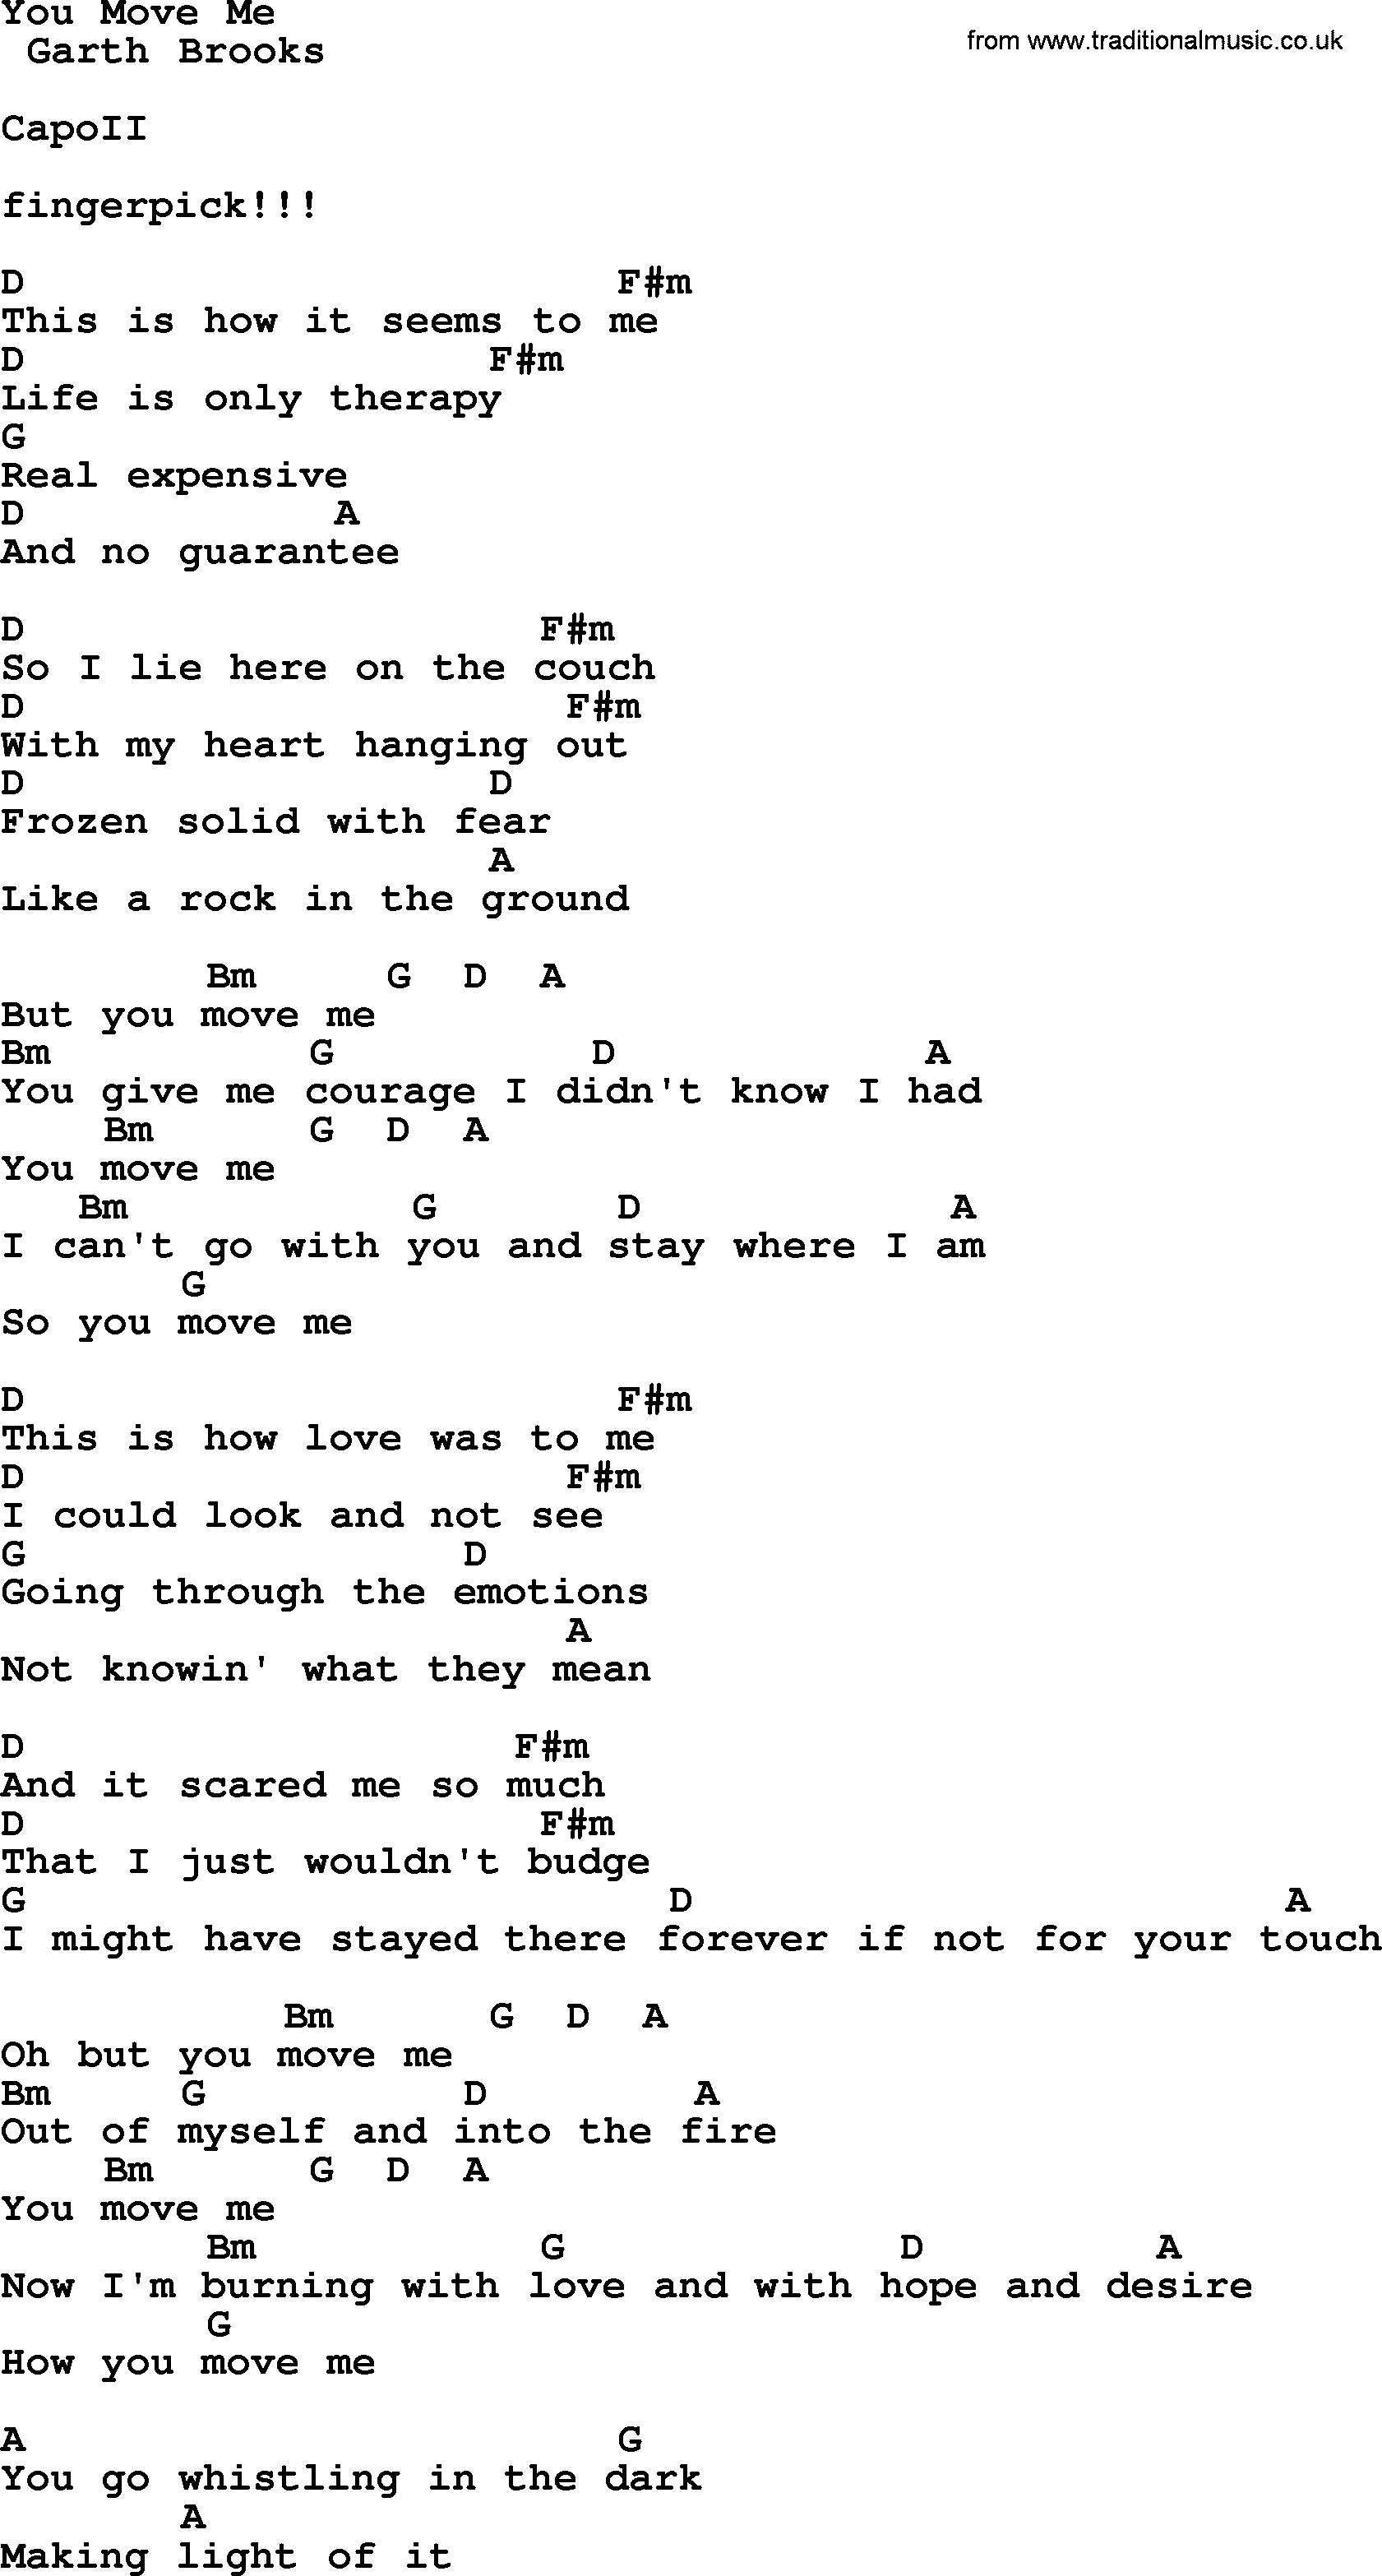 Garth Brooks song: You Move Me, lyrics and chords